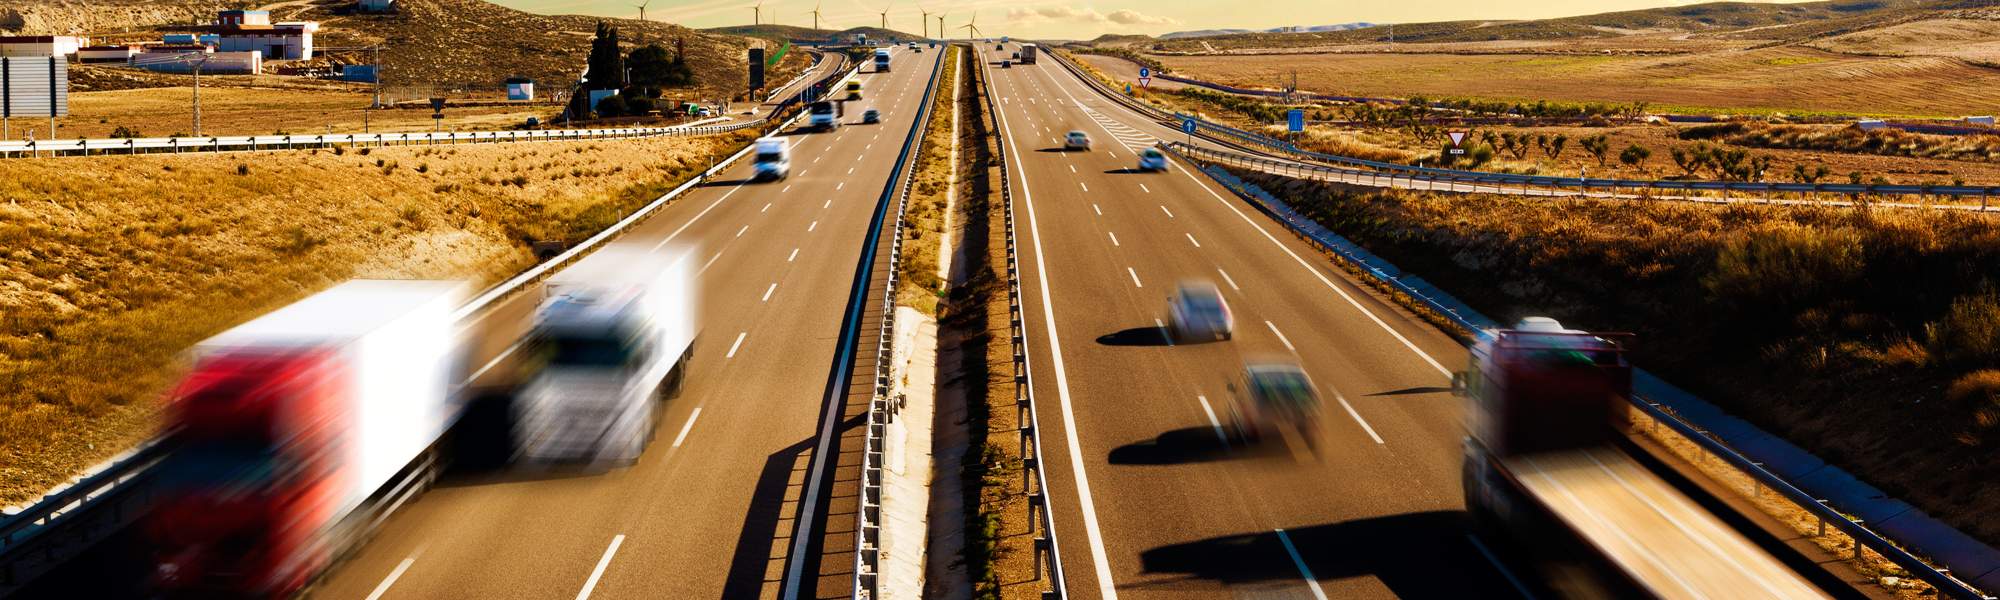 A new era for road transport in the EU?